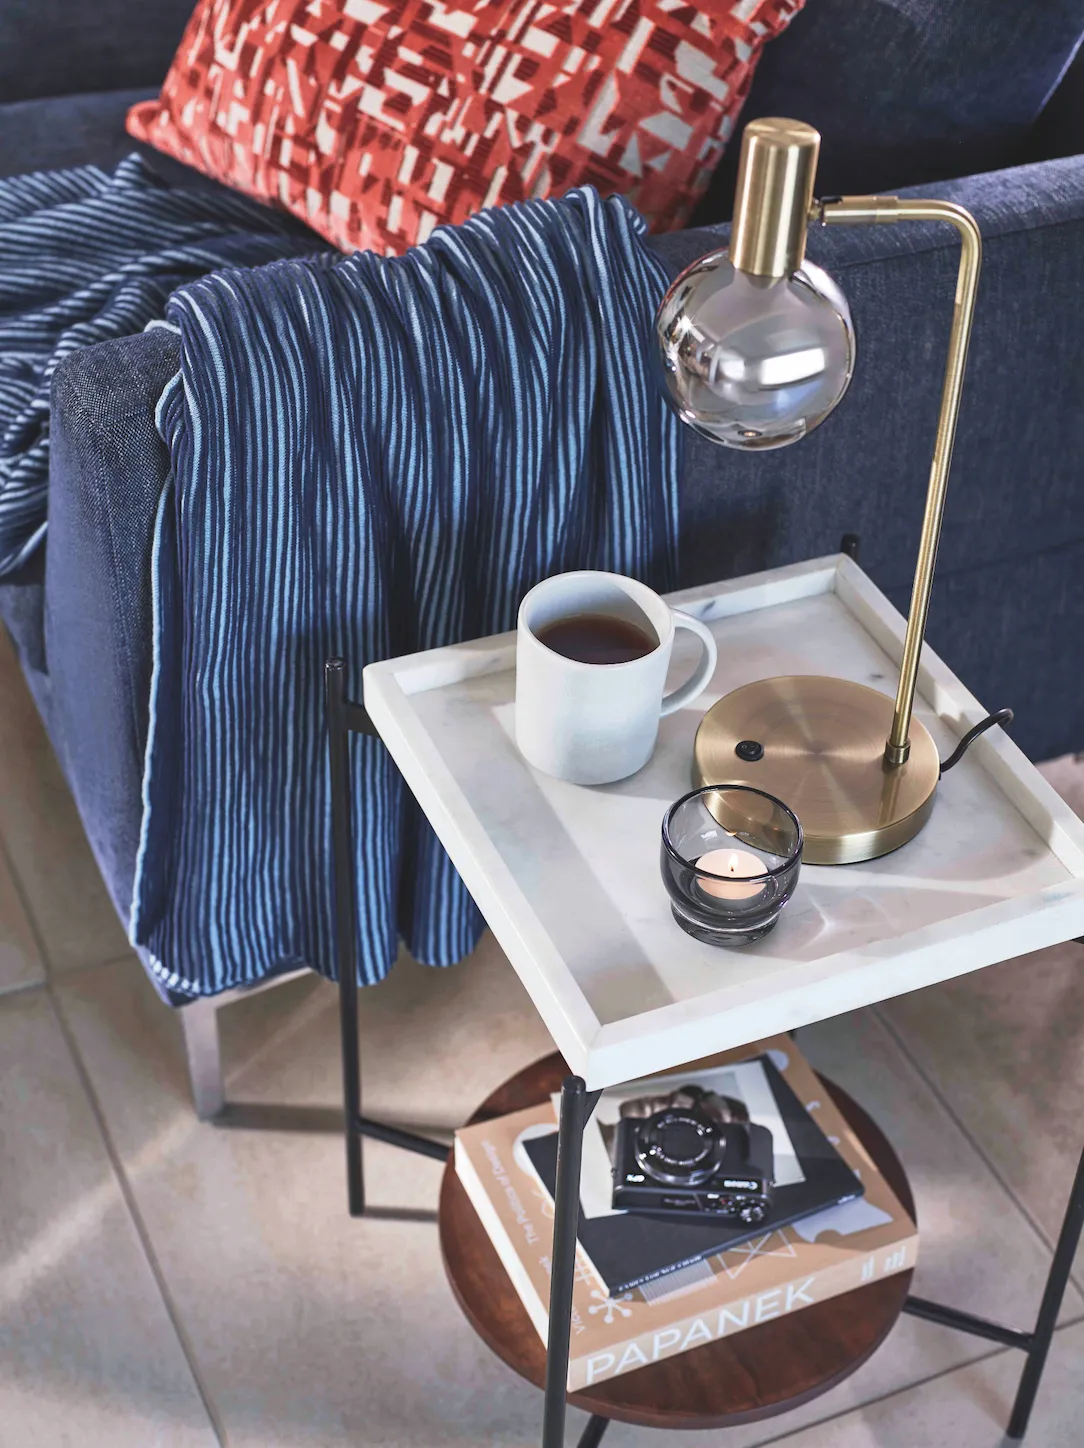 Belgrave medium two-seater sofa in Erin Midnight, £1,599; Design Project by John Lewis cushion in Burnt Orange, £60; Rib knit throw in Navy, £50; Rubin side table in Black, £199; Neo mug in Putty, £8; LSA International Utility tealight holder, £25 for a set of two; Huxley task lamp in Smoke/Antique Brass, £70; Canon PowerShot G7 X Mark II digital camera, £529.99, all John Lewis & Partners